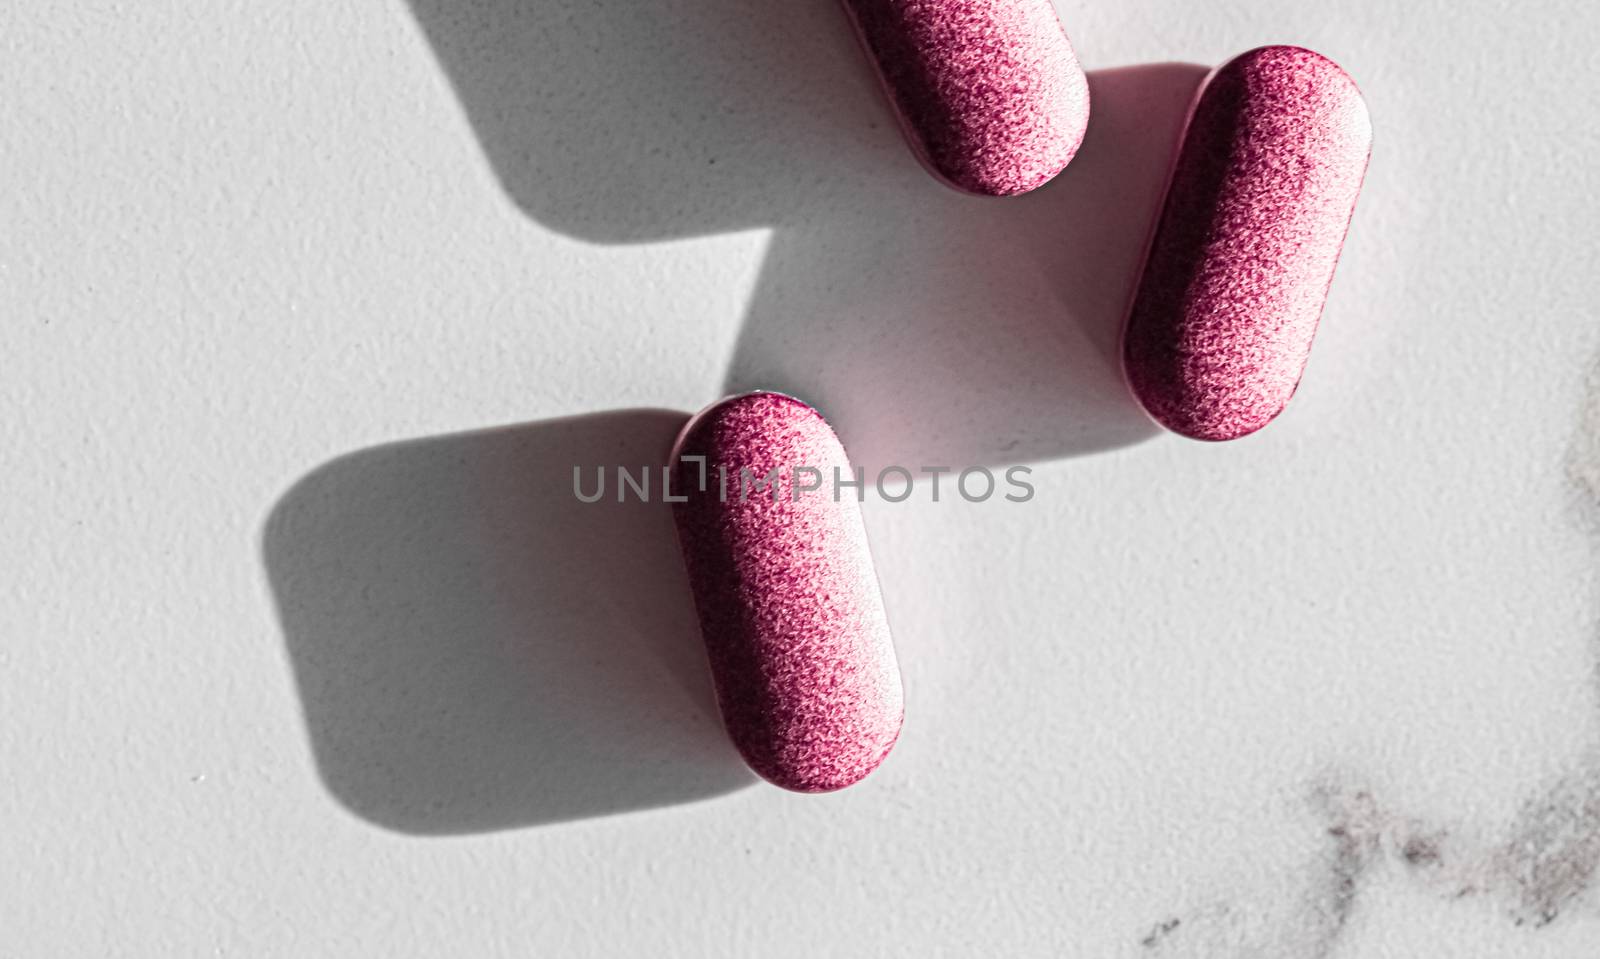 Pink pills as herbal medication, pharma brand store, probiotic drugs as nutrition healthcare or diet supplement products for pharmaceutical industry ads